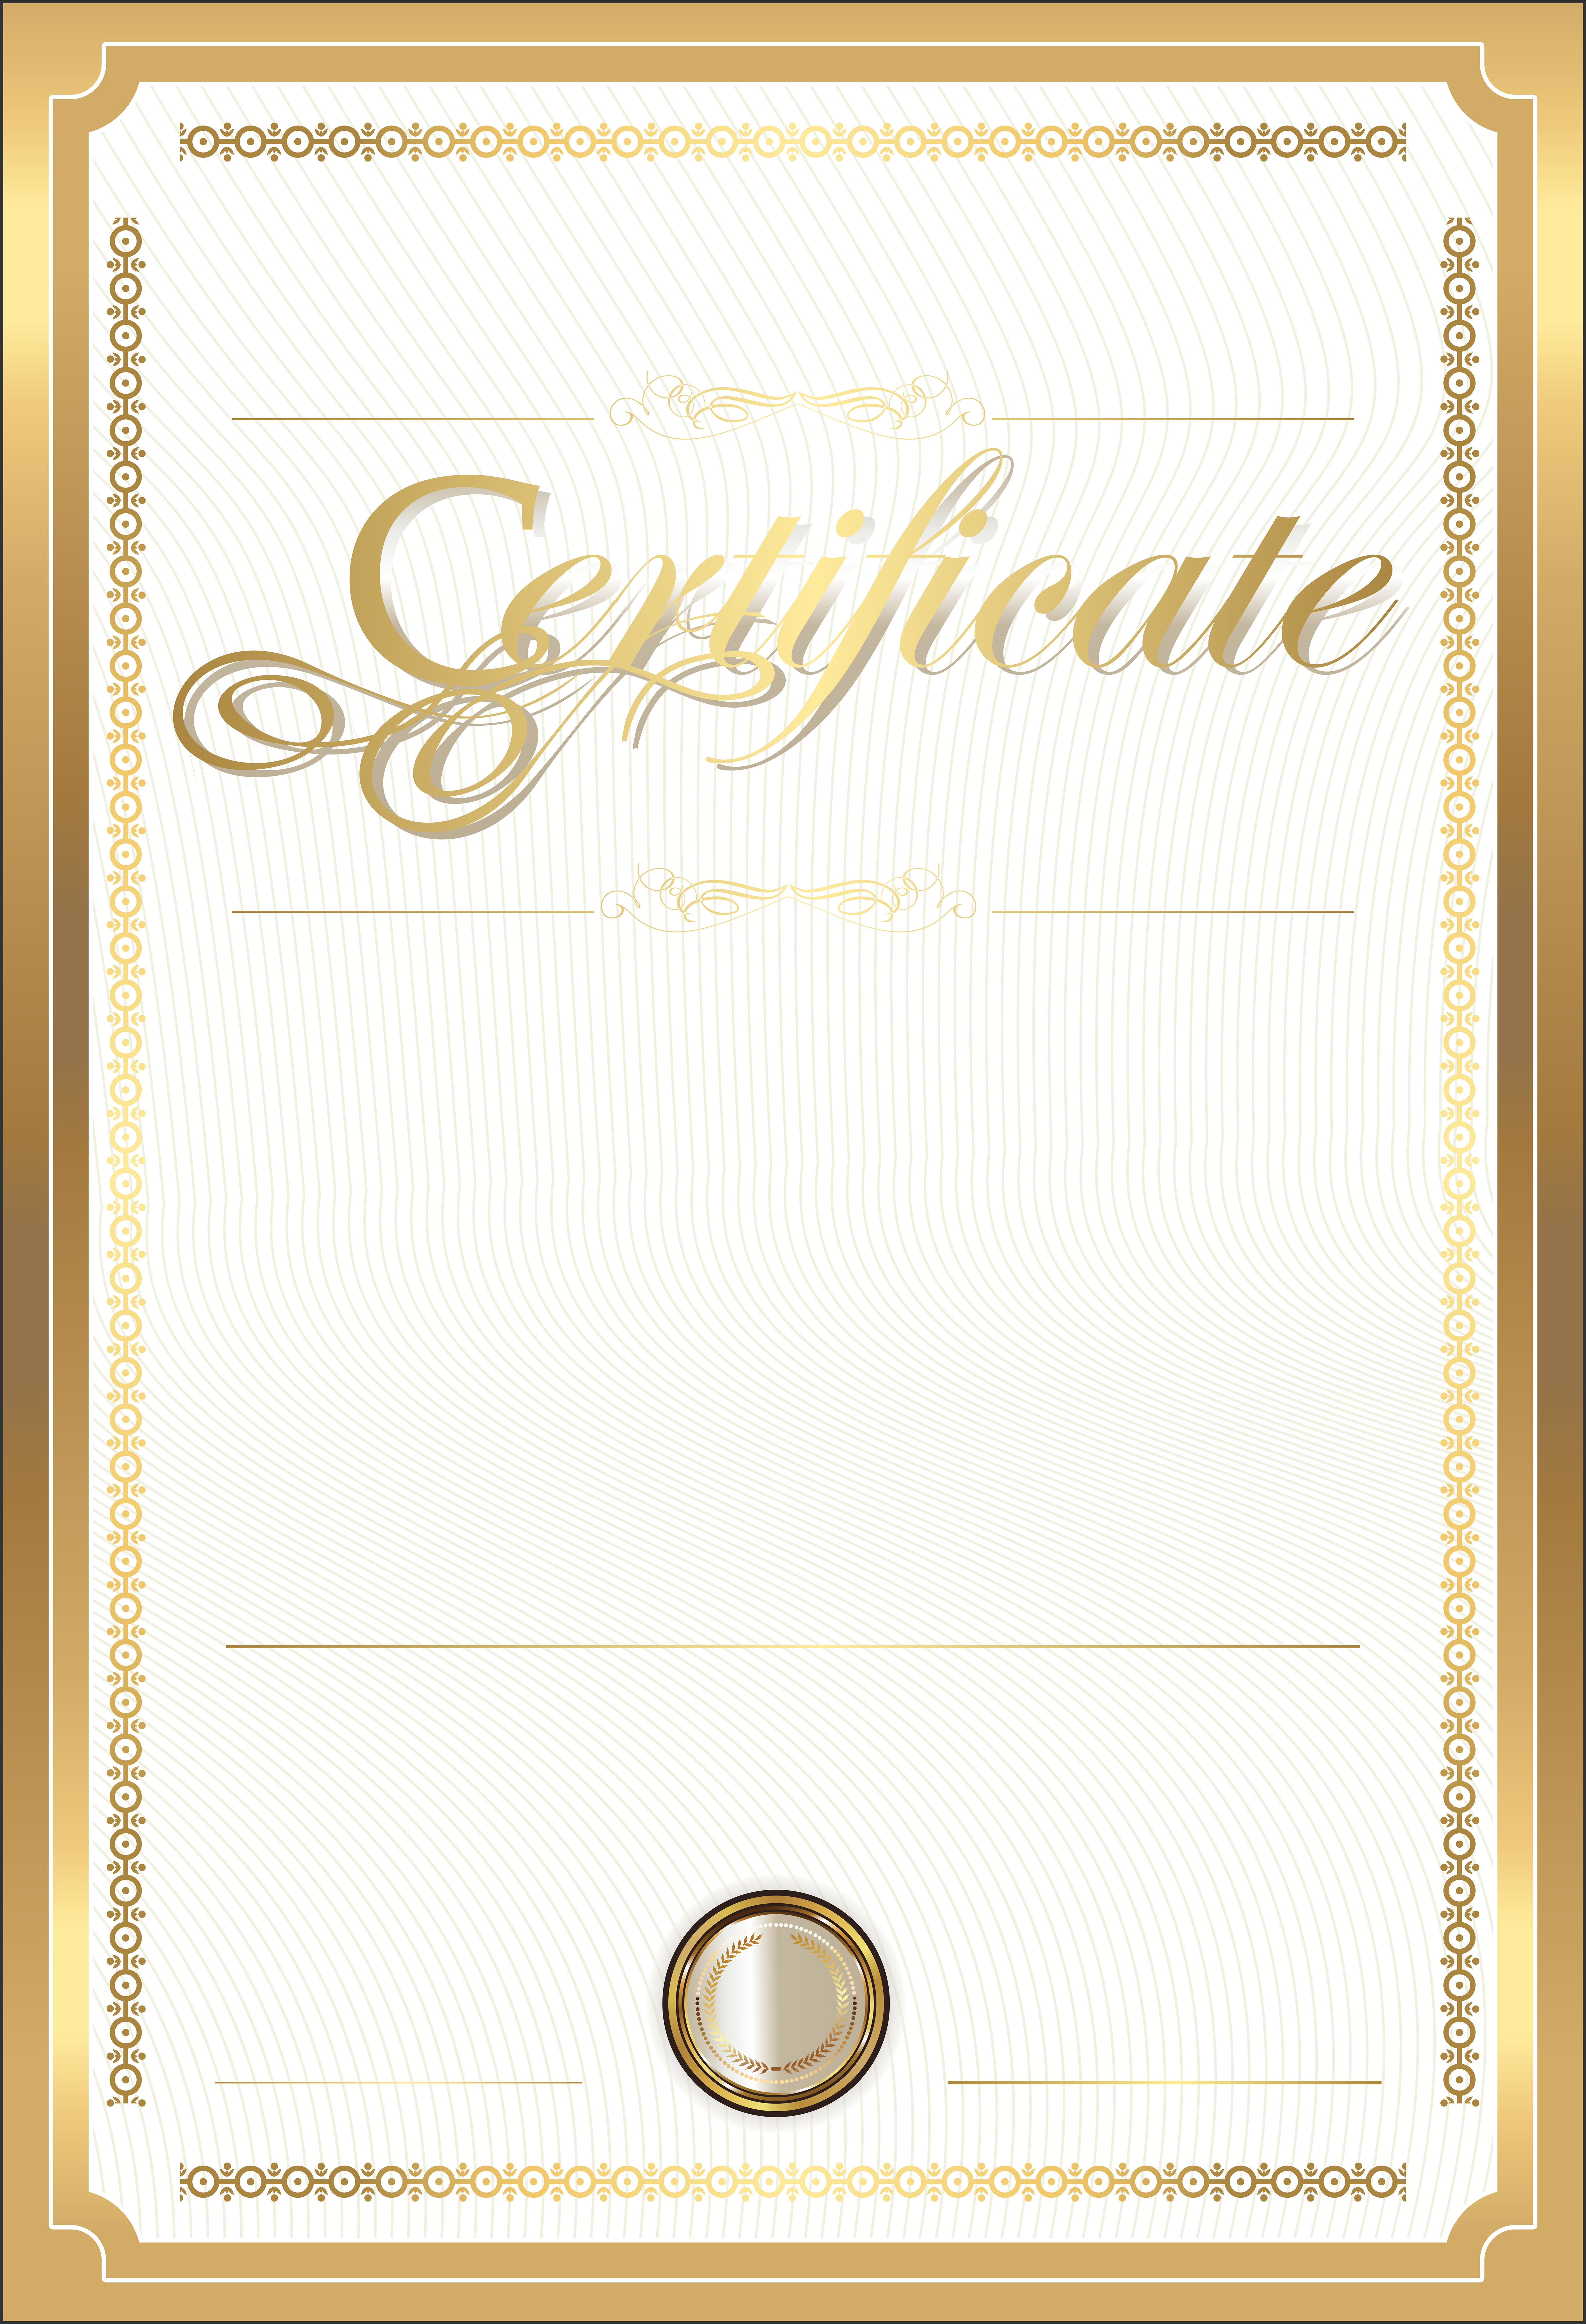 Professional Certificate Background PNG Image